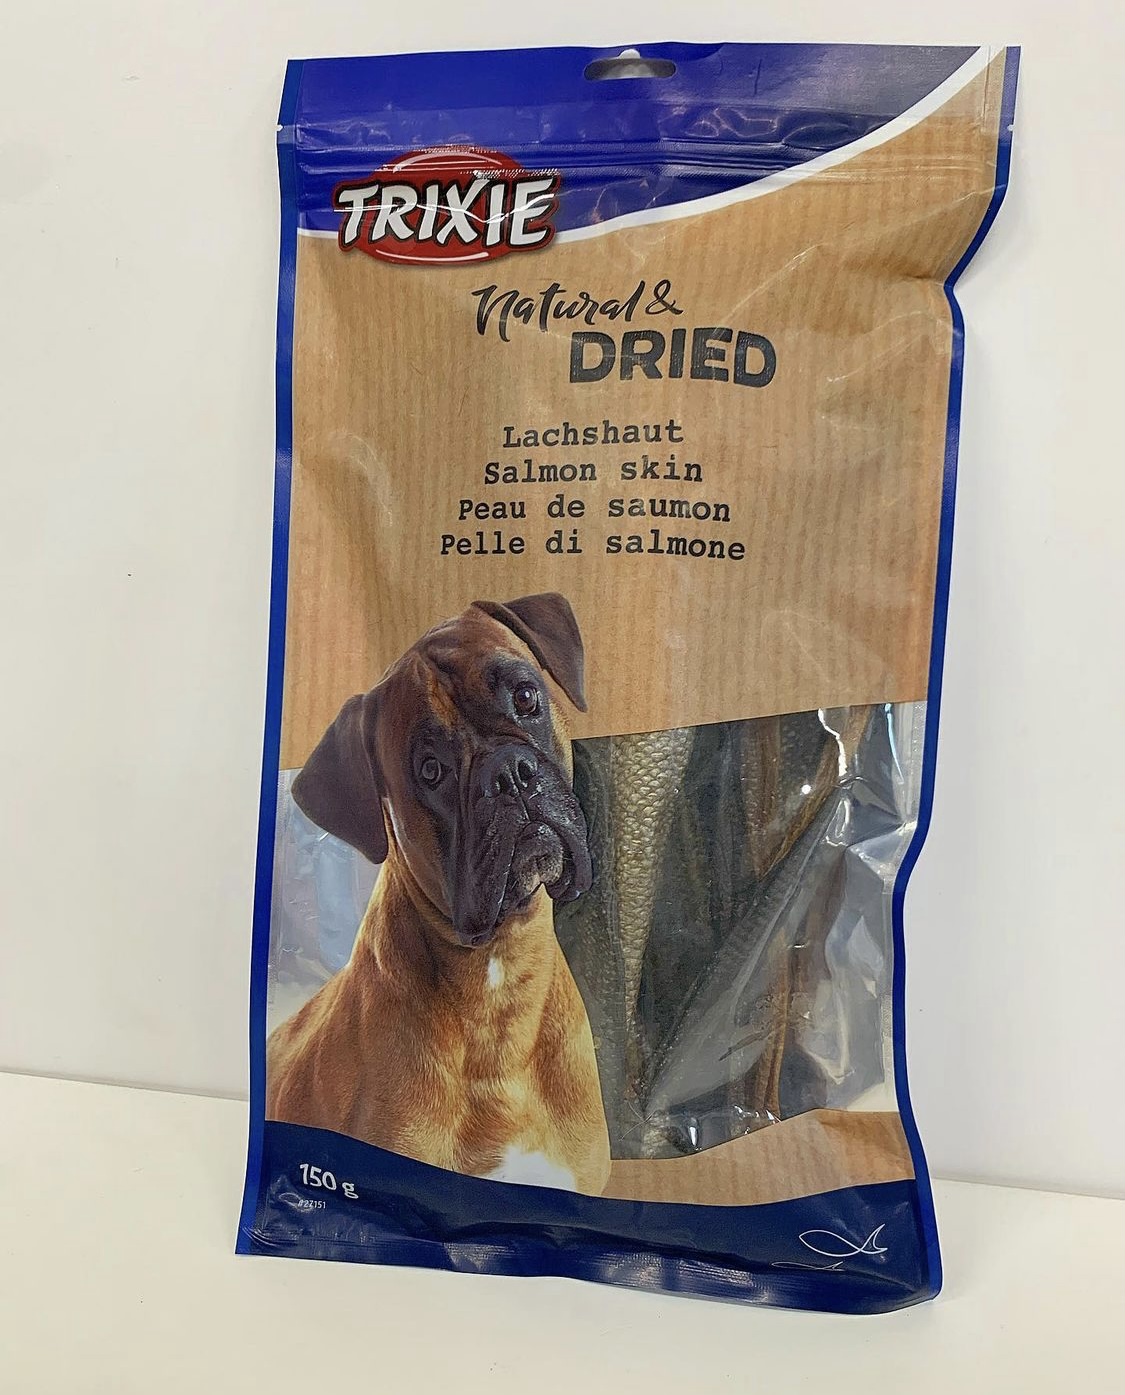 Trixie natural dried